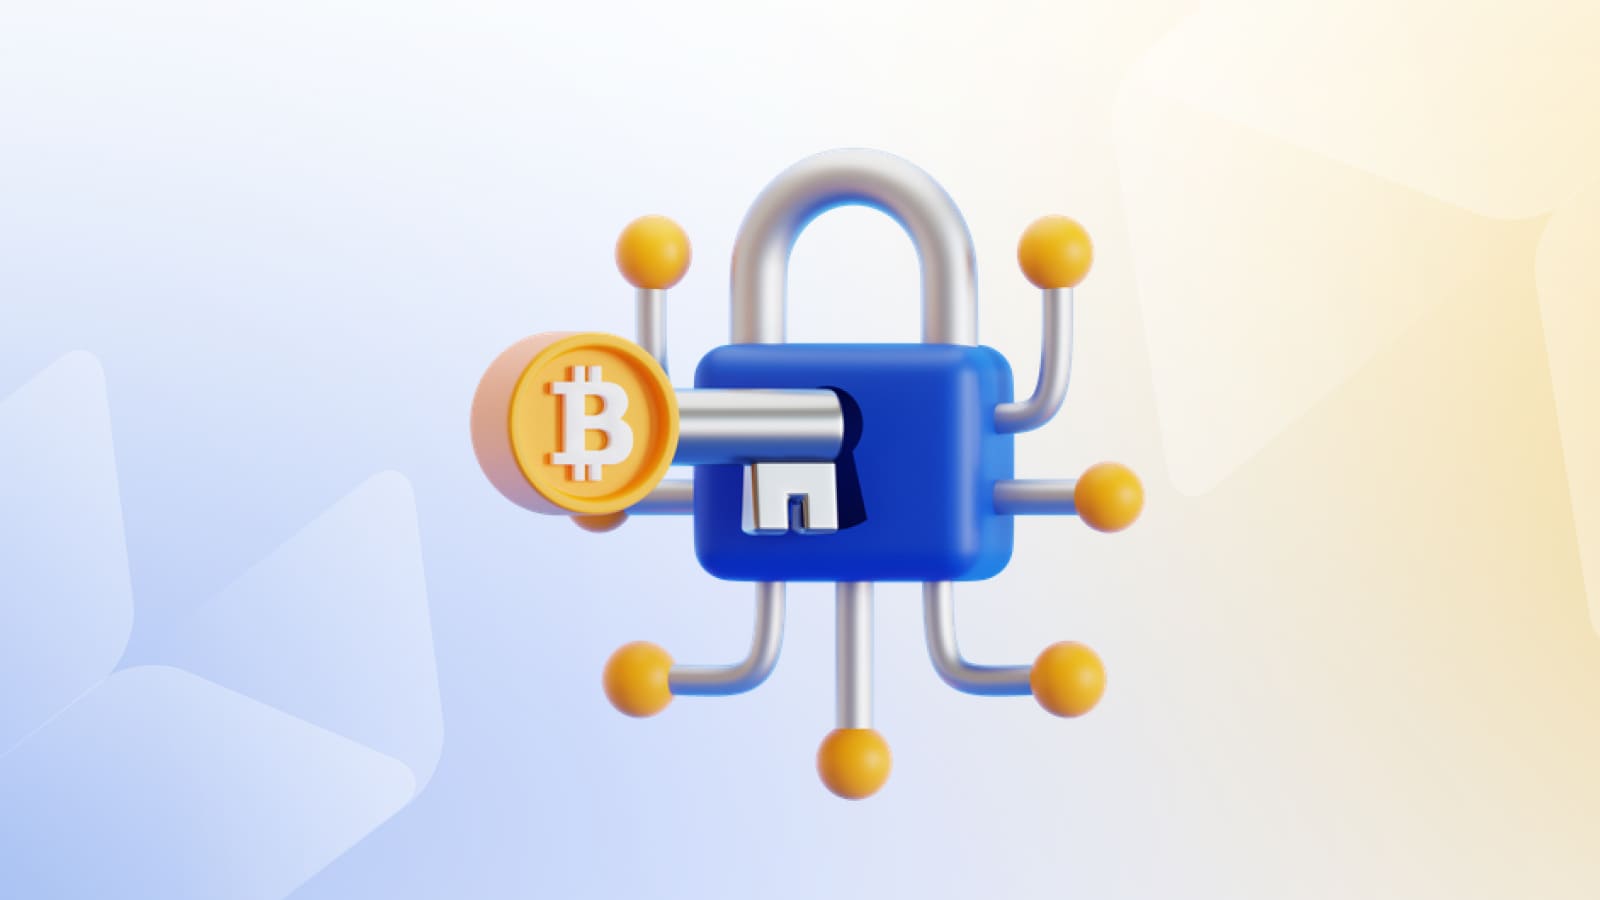 A private key is used for fund access and a public key for transaction performance.